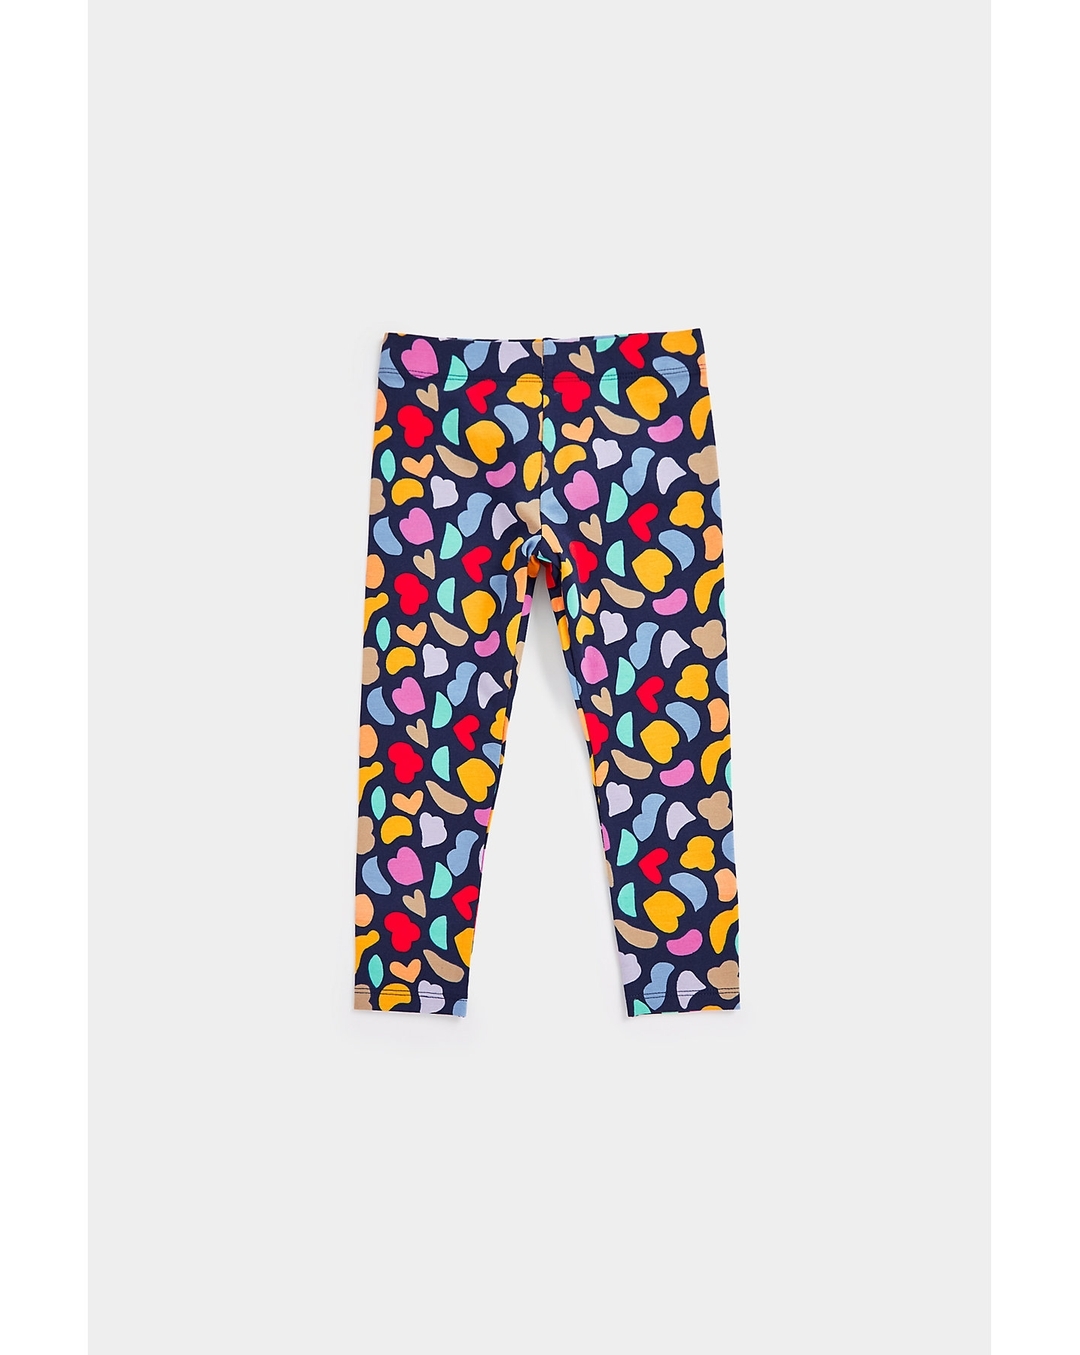 Multi Color Girls Legging at Rs 85/piece(s), Fancy Leggings in Indore